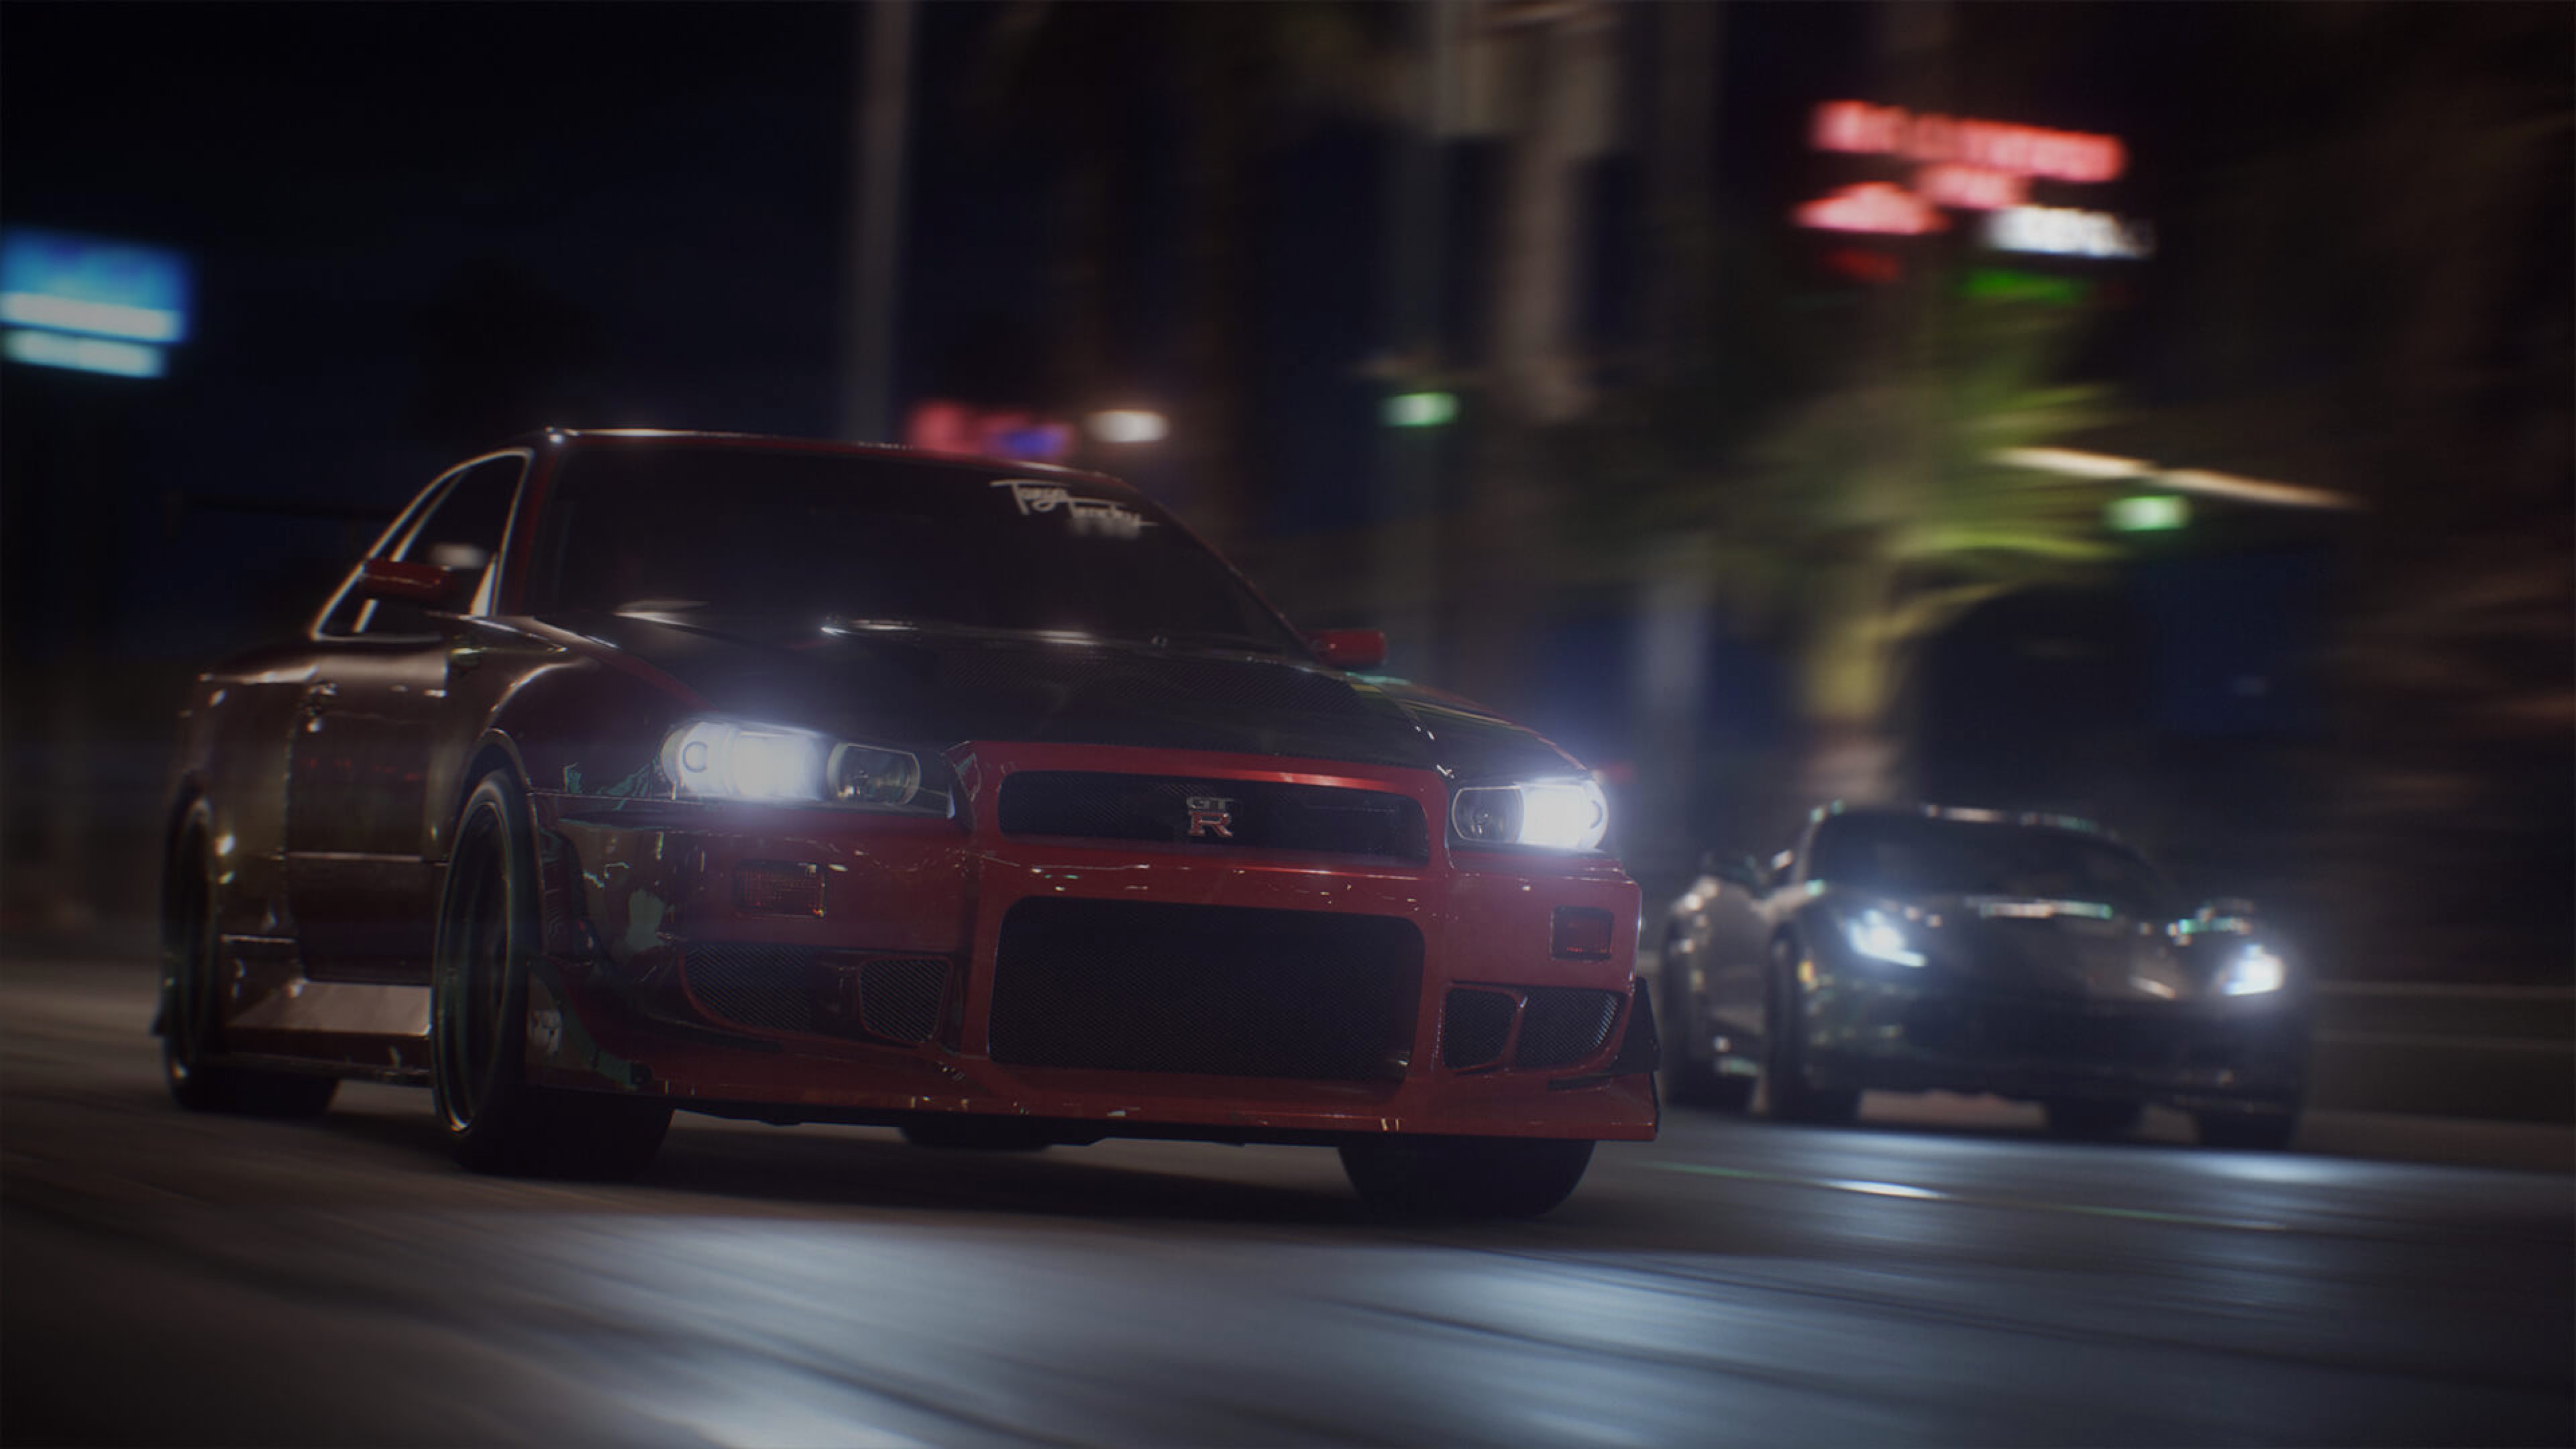 need for speed payback release date wolfenstein 2 release date